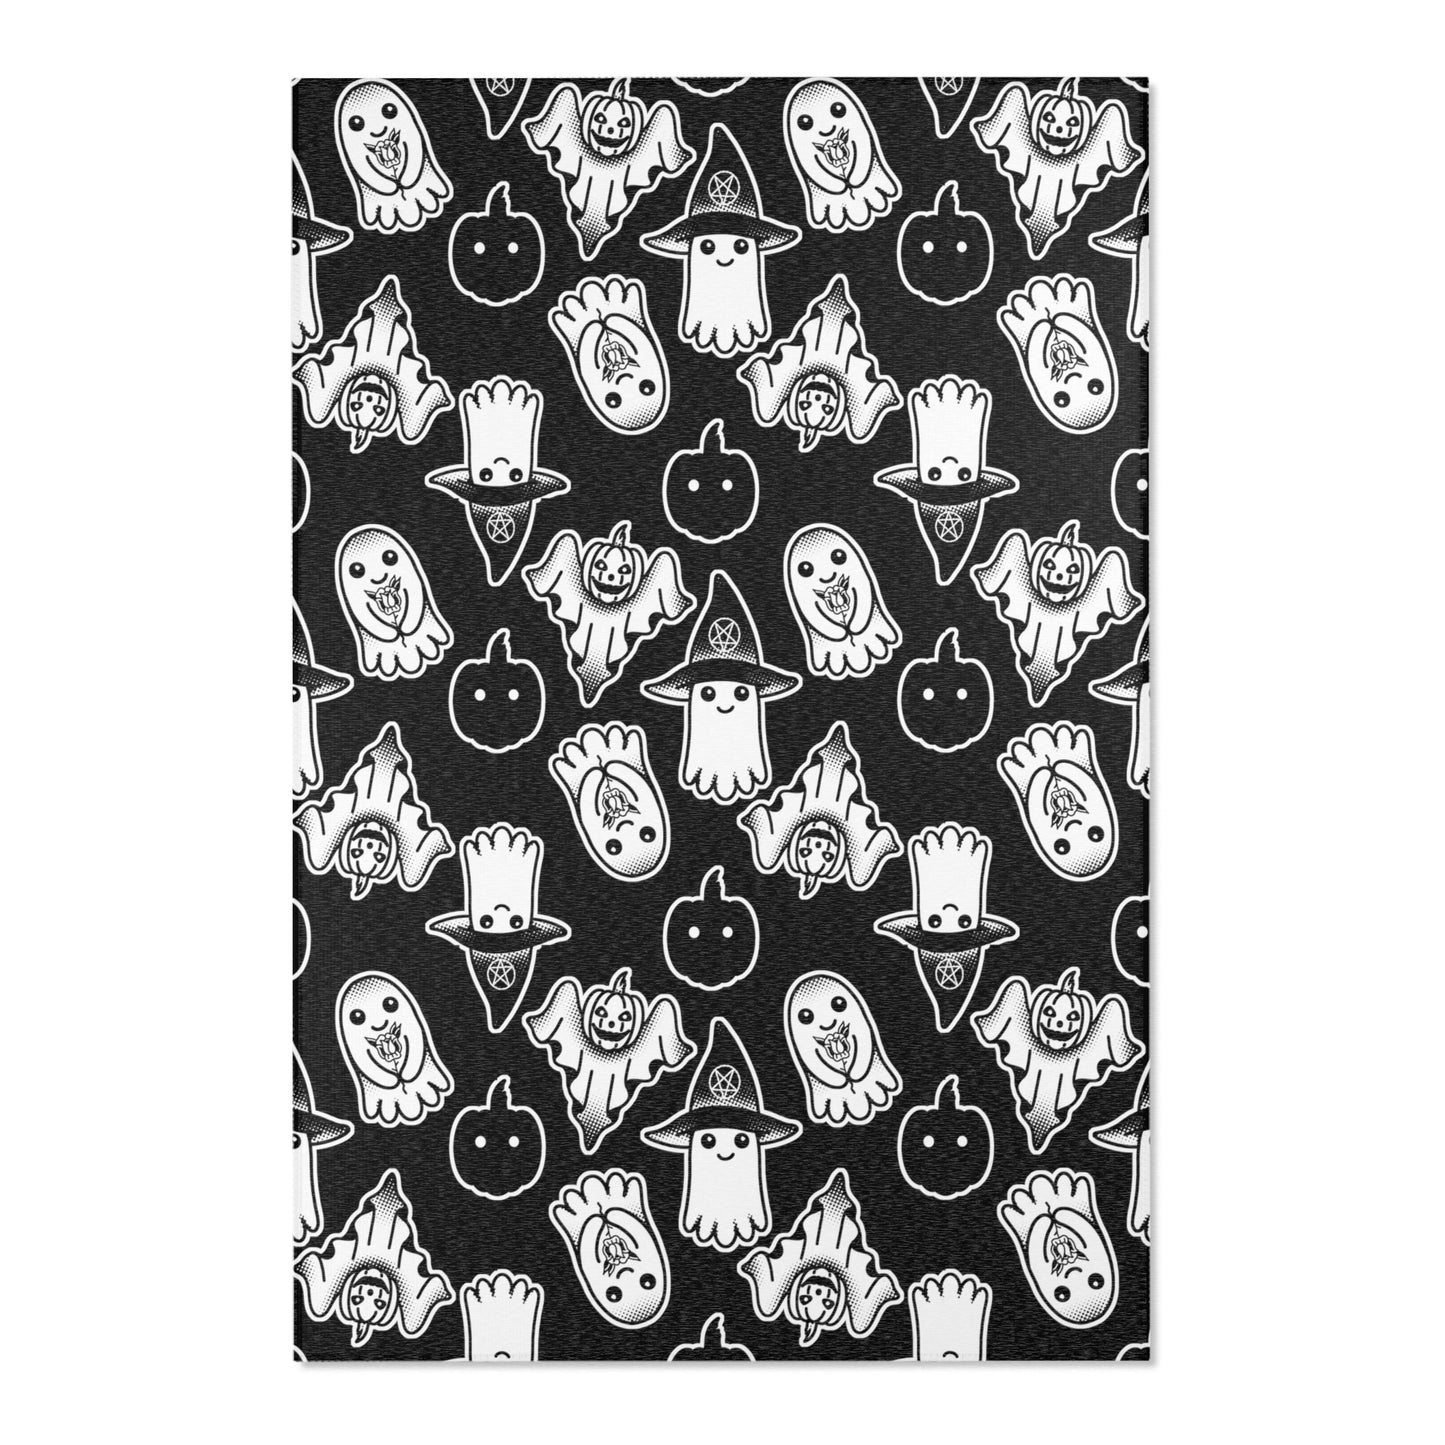 Spooky Ghosts Area Rug